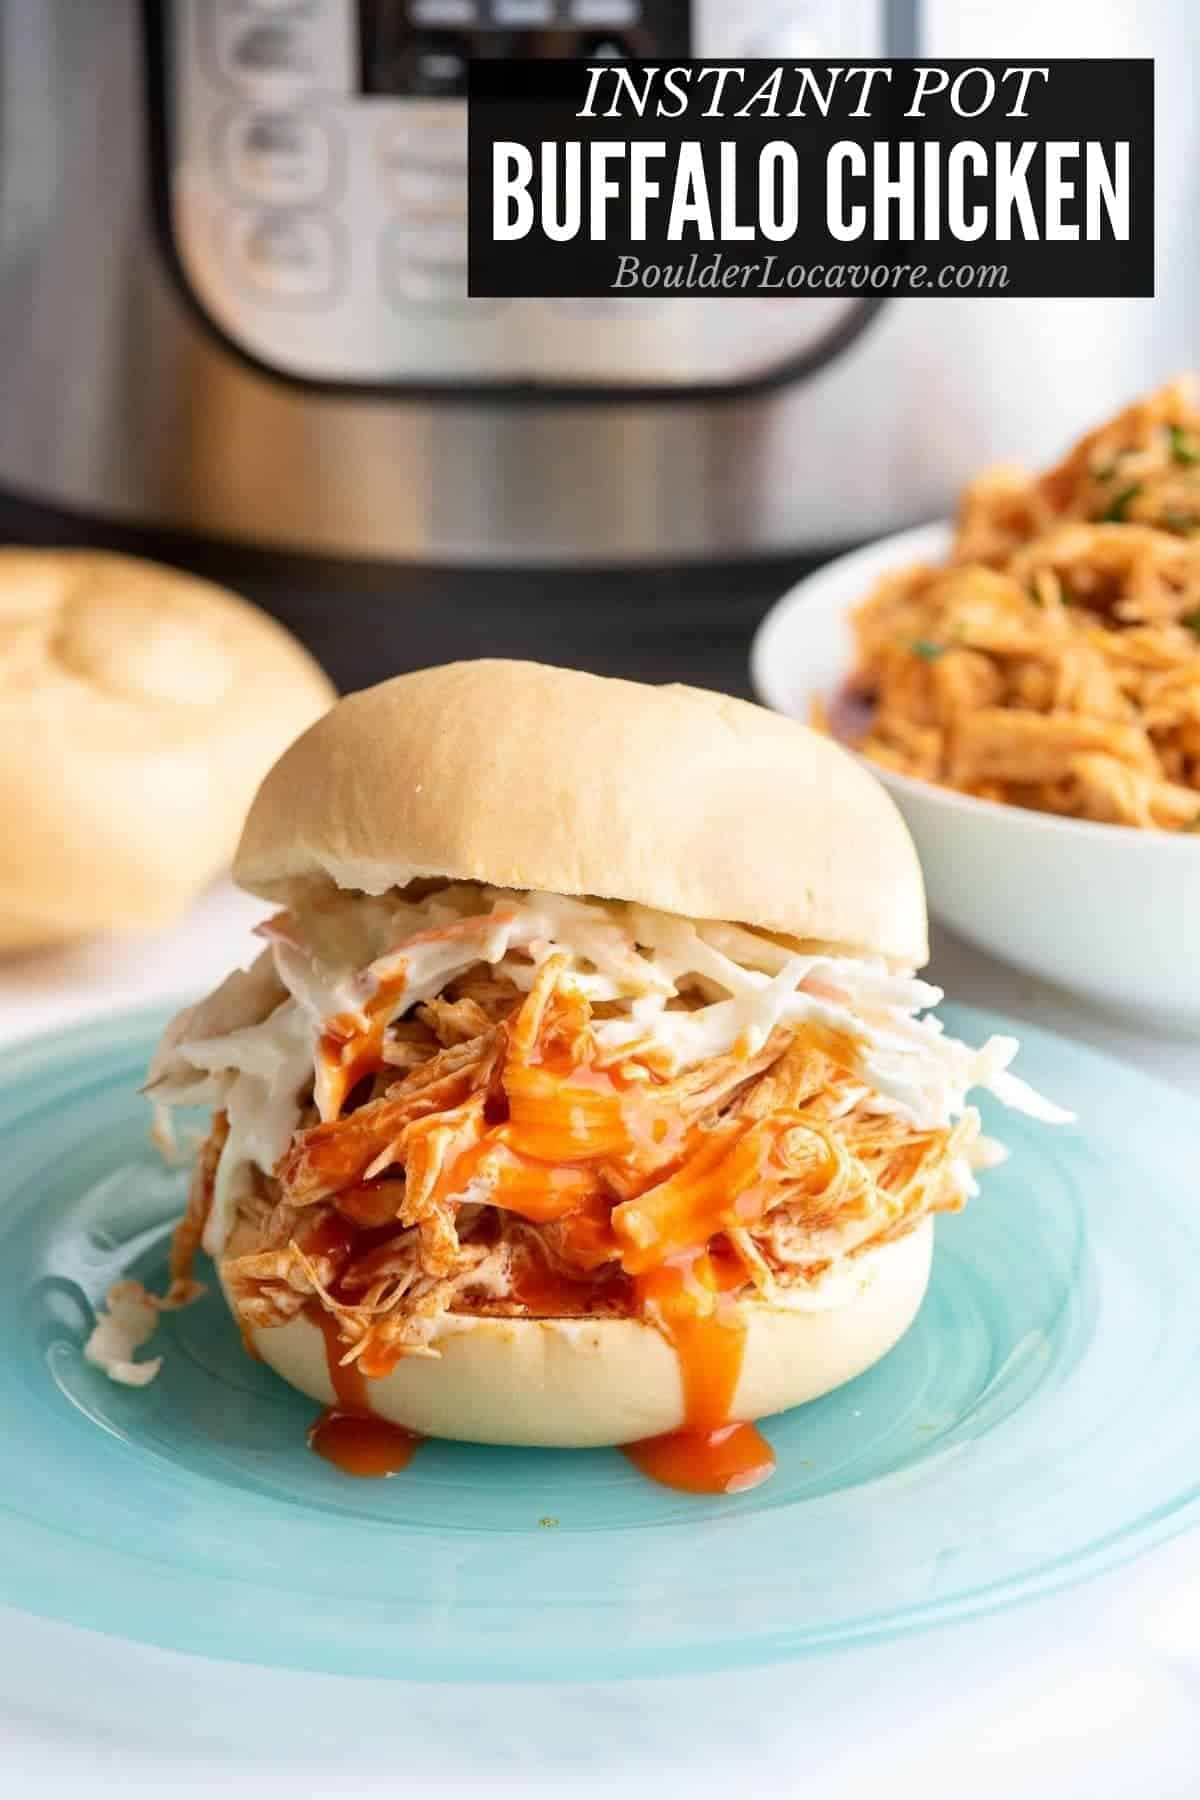 A buffalo chicken sandwich with coleslaw and buffalo sauce on a glass plate.